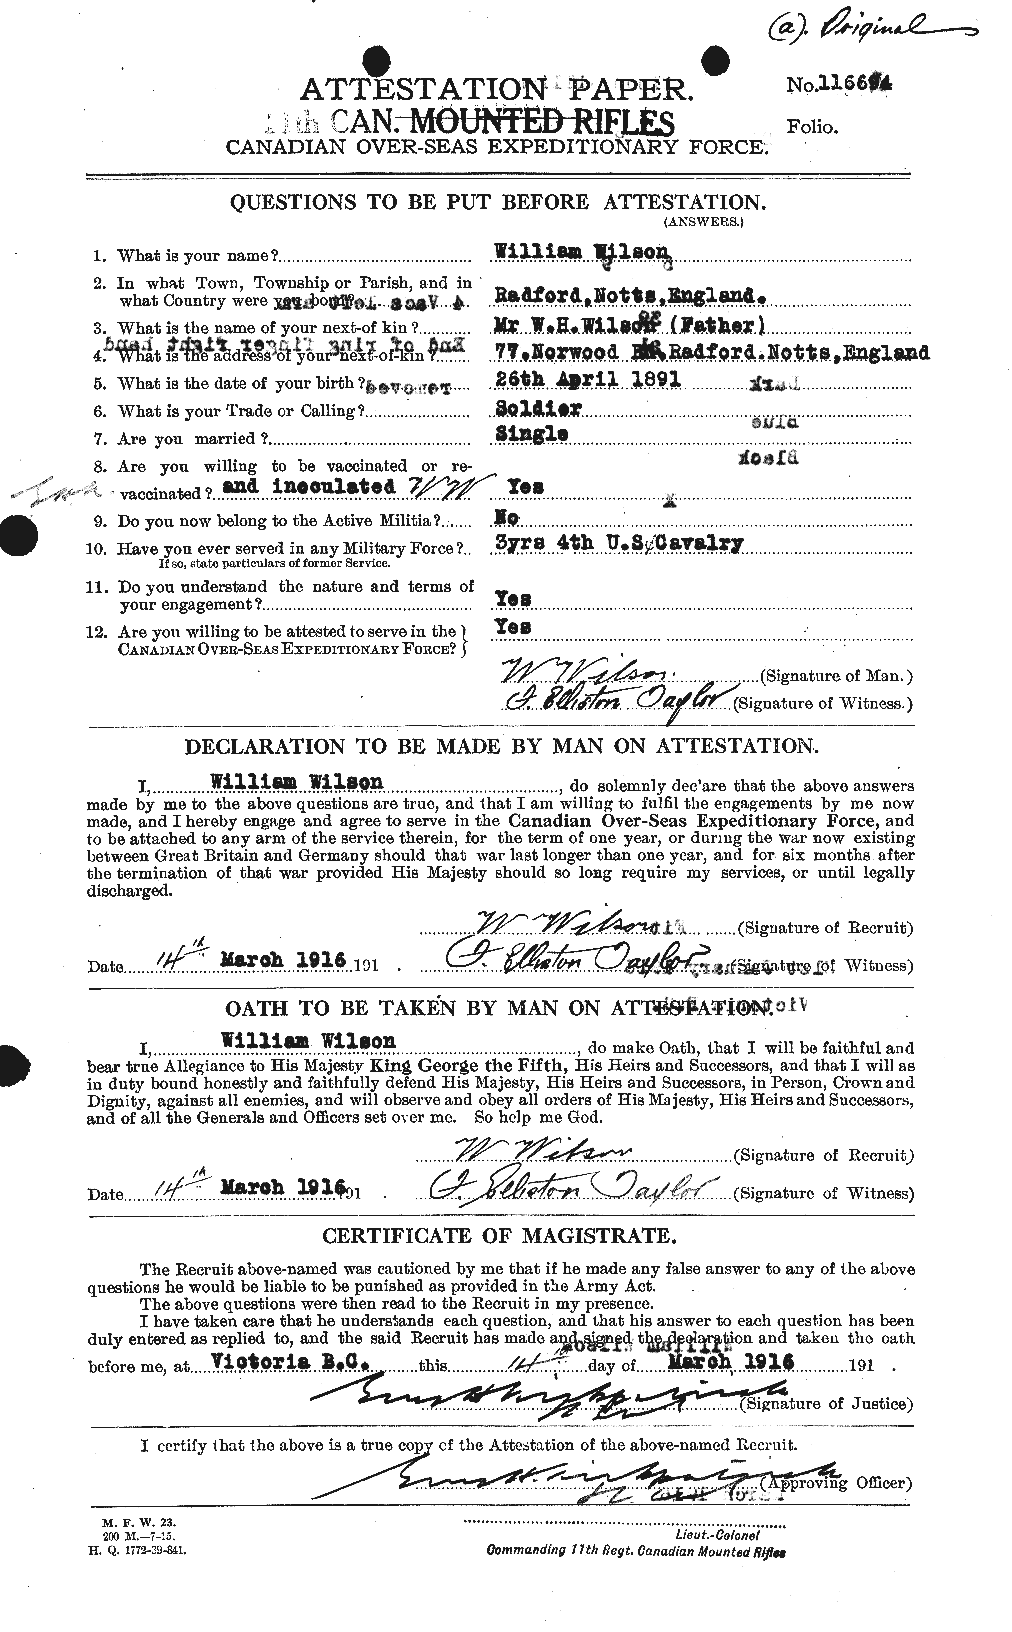 Personnel Records of the First World War - CEF 681868a